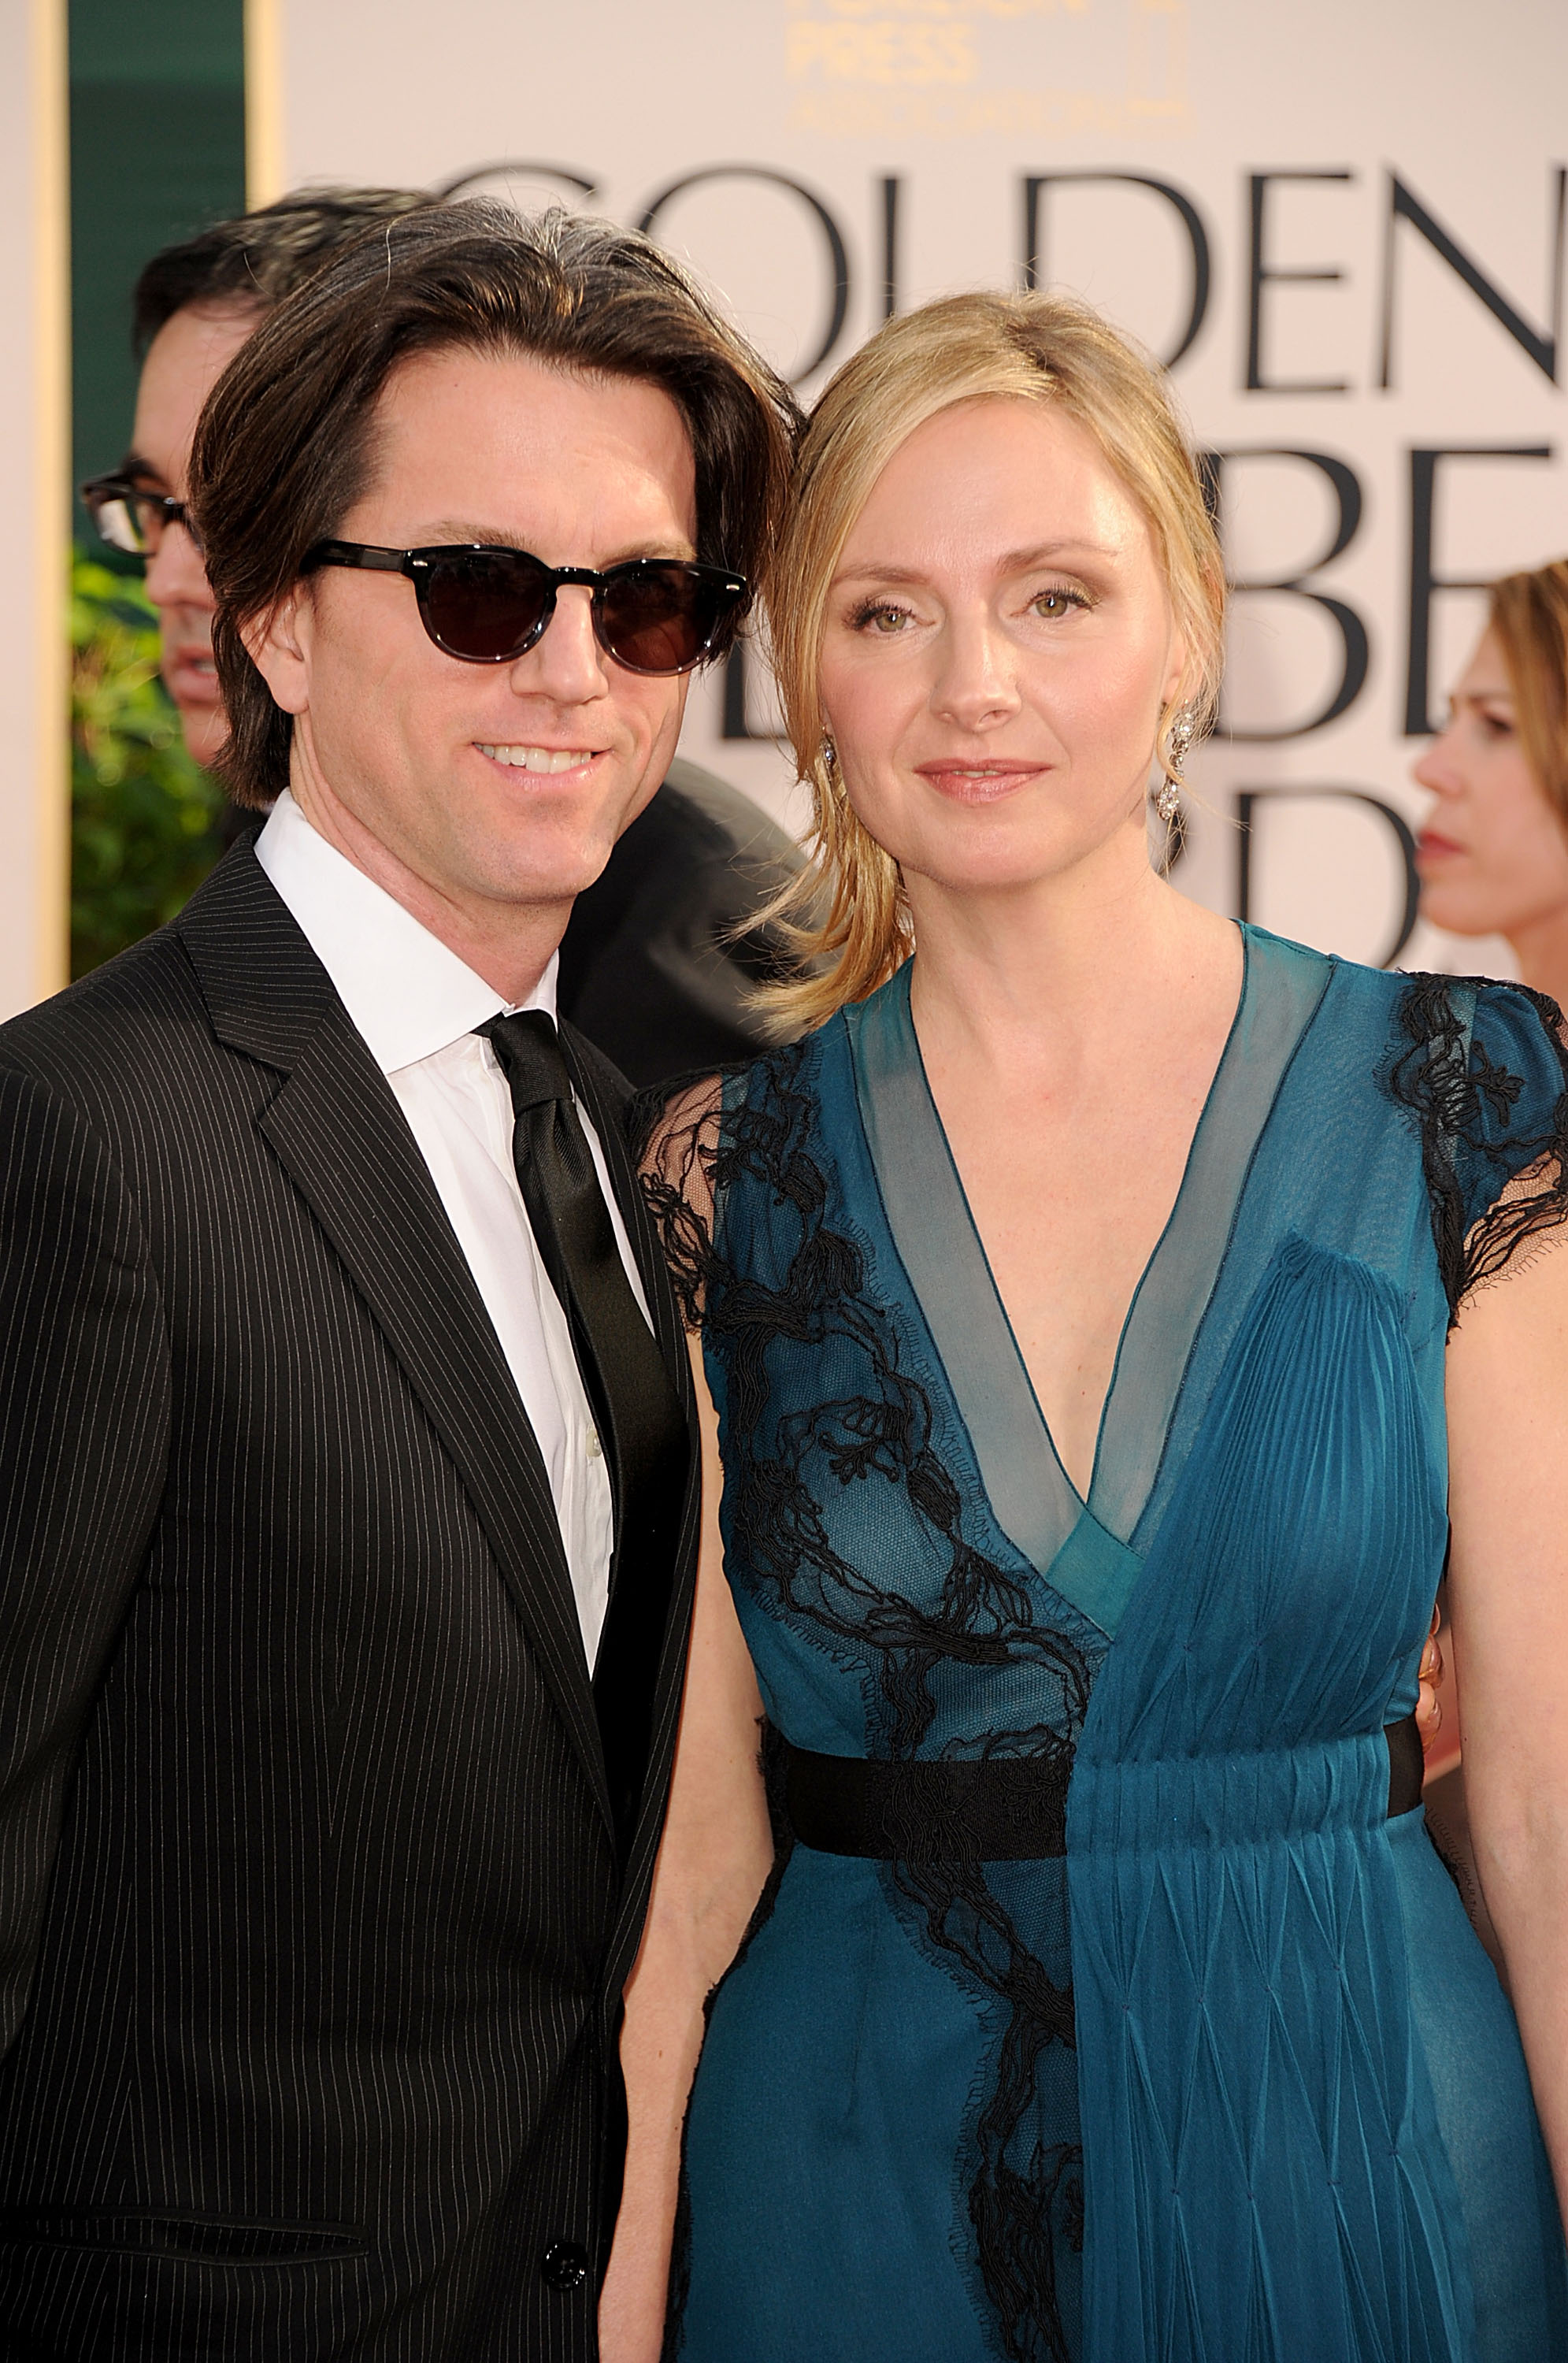 Jon Patrick Walker and Hope Davis at the 68th Annual Golden Globe Awards on January 16, 2011, in Beverly Hills | Source: Getty Images